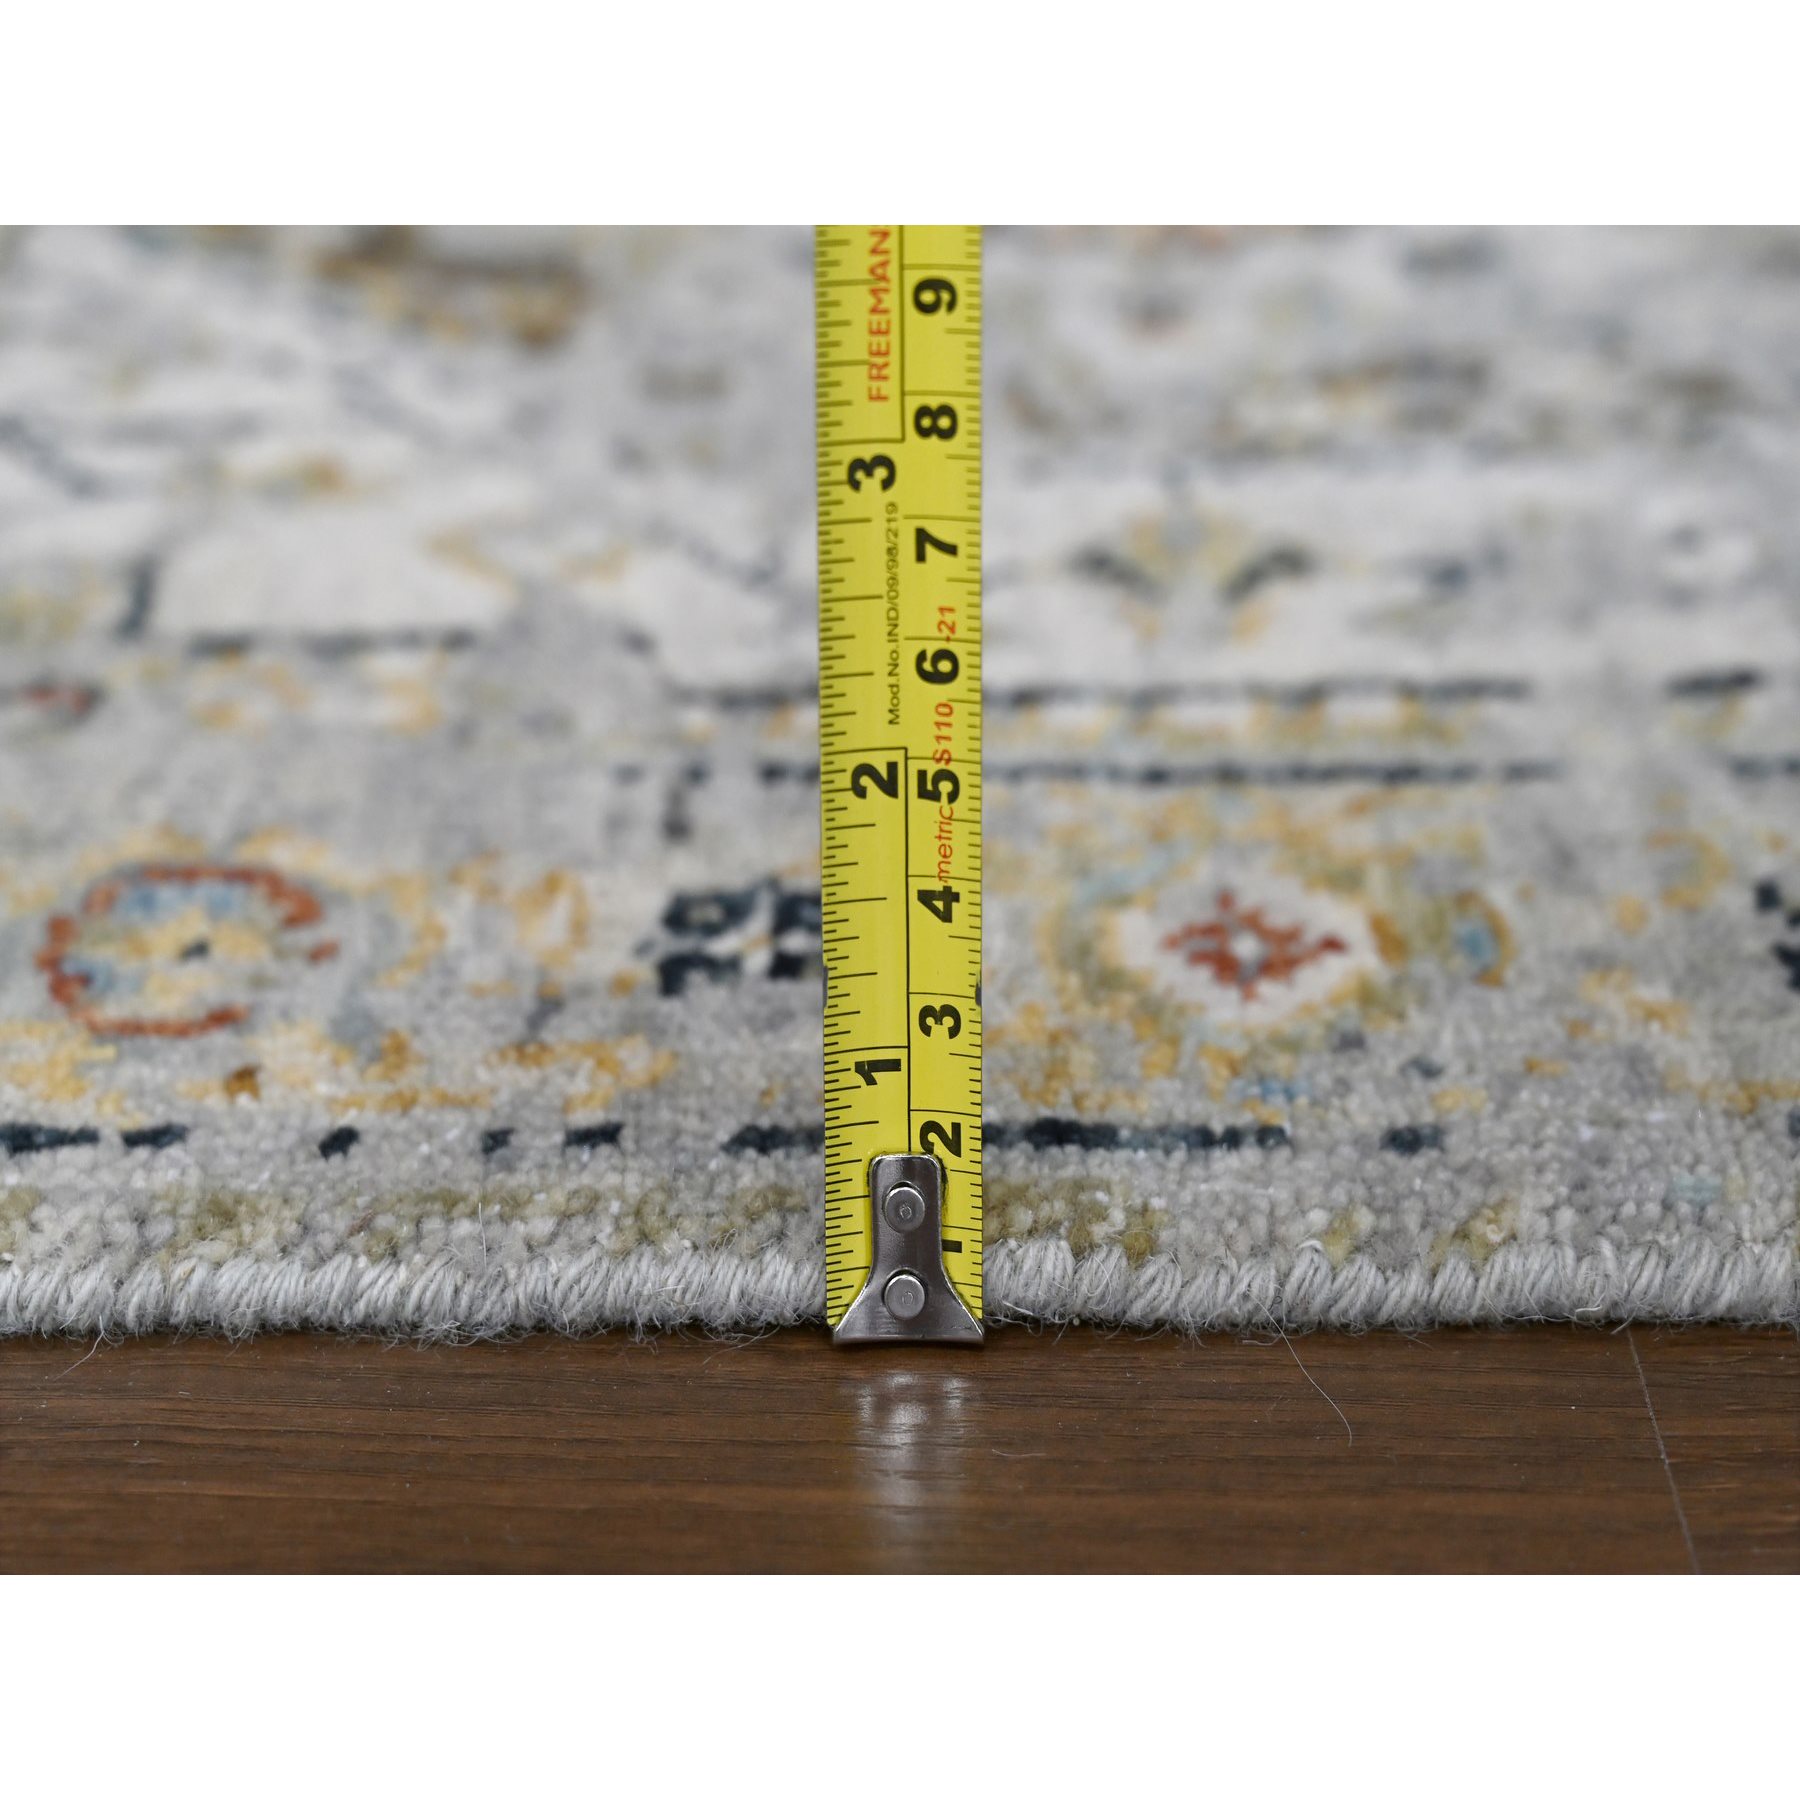 Transitional-Hand-Knotted-Rug-423150